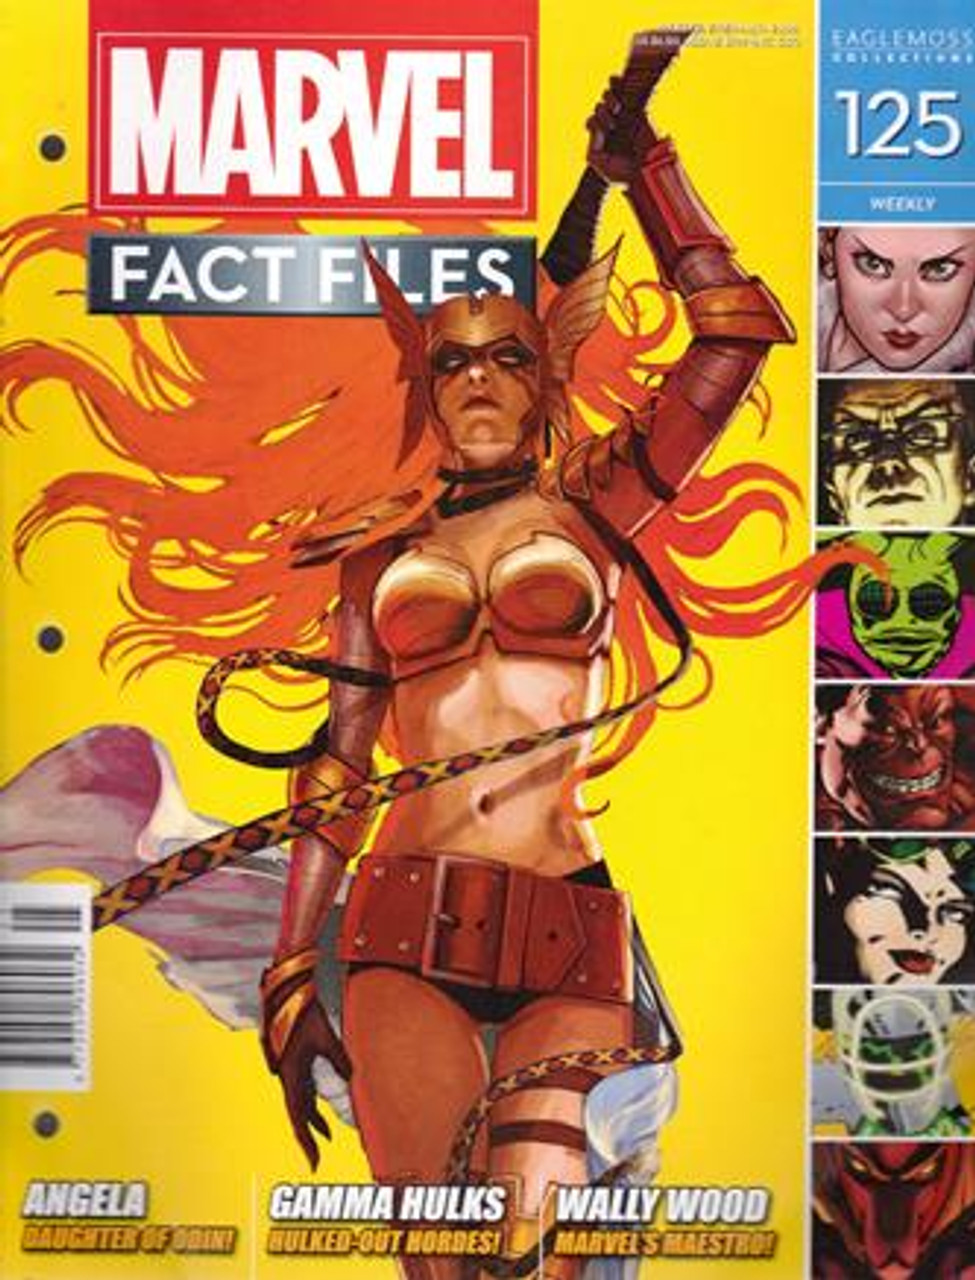 Marvel Fact Files: Vol 125 (Eaglemoss Collections)